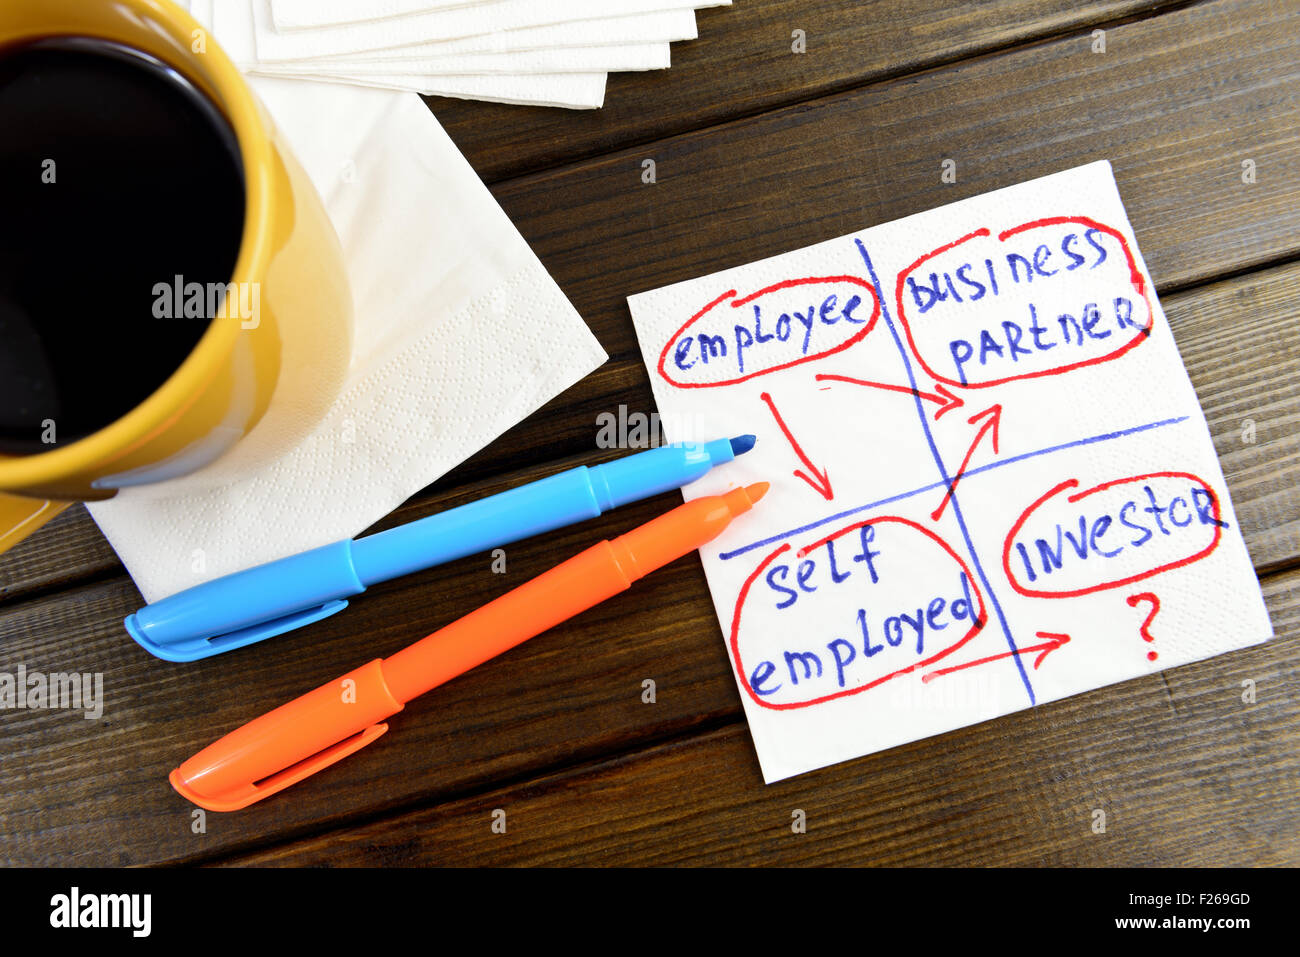 planning career think positive -  handwriting on a napkin with a cup of coffee Stock Photo